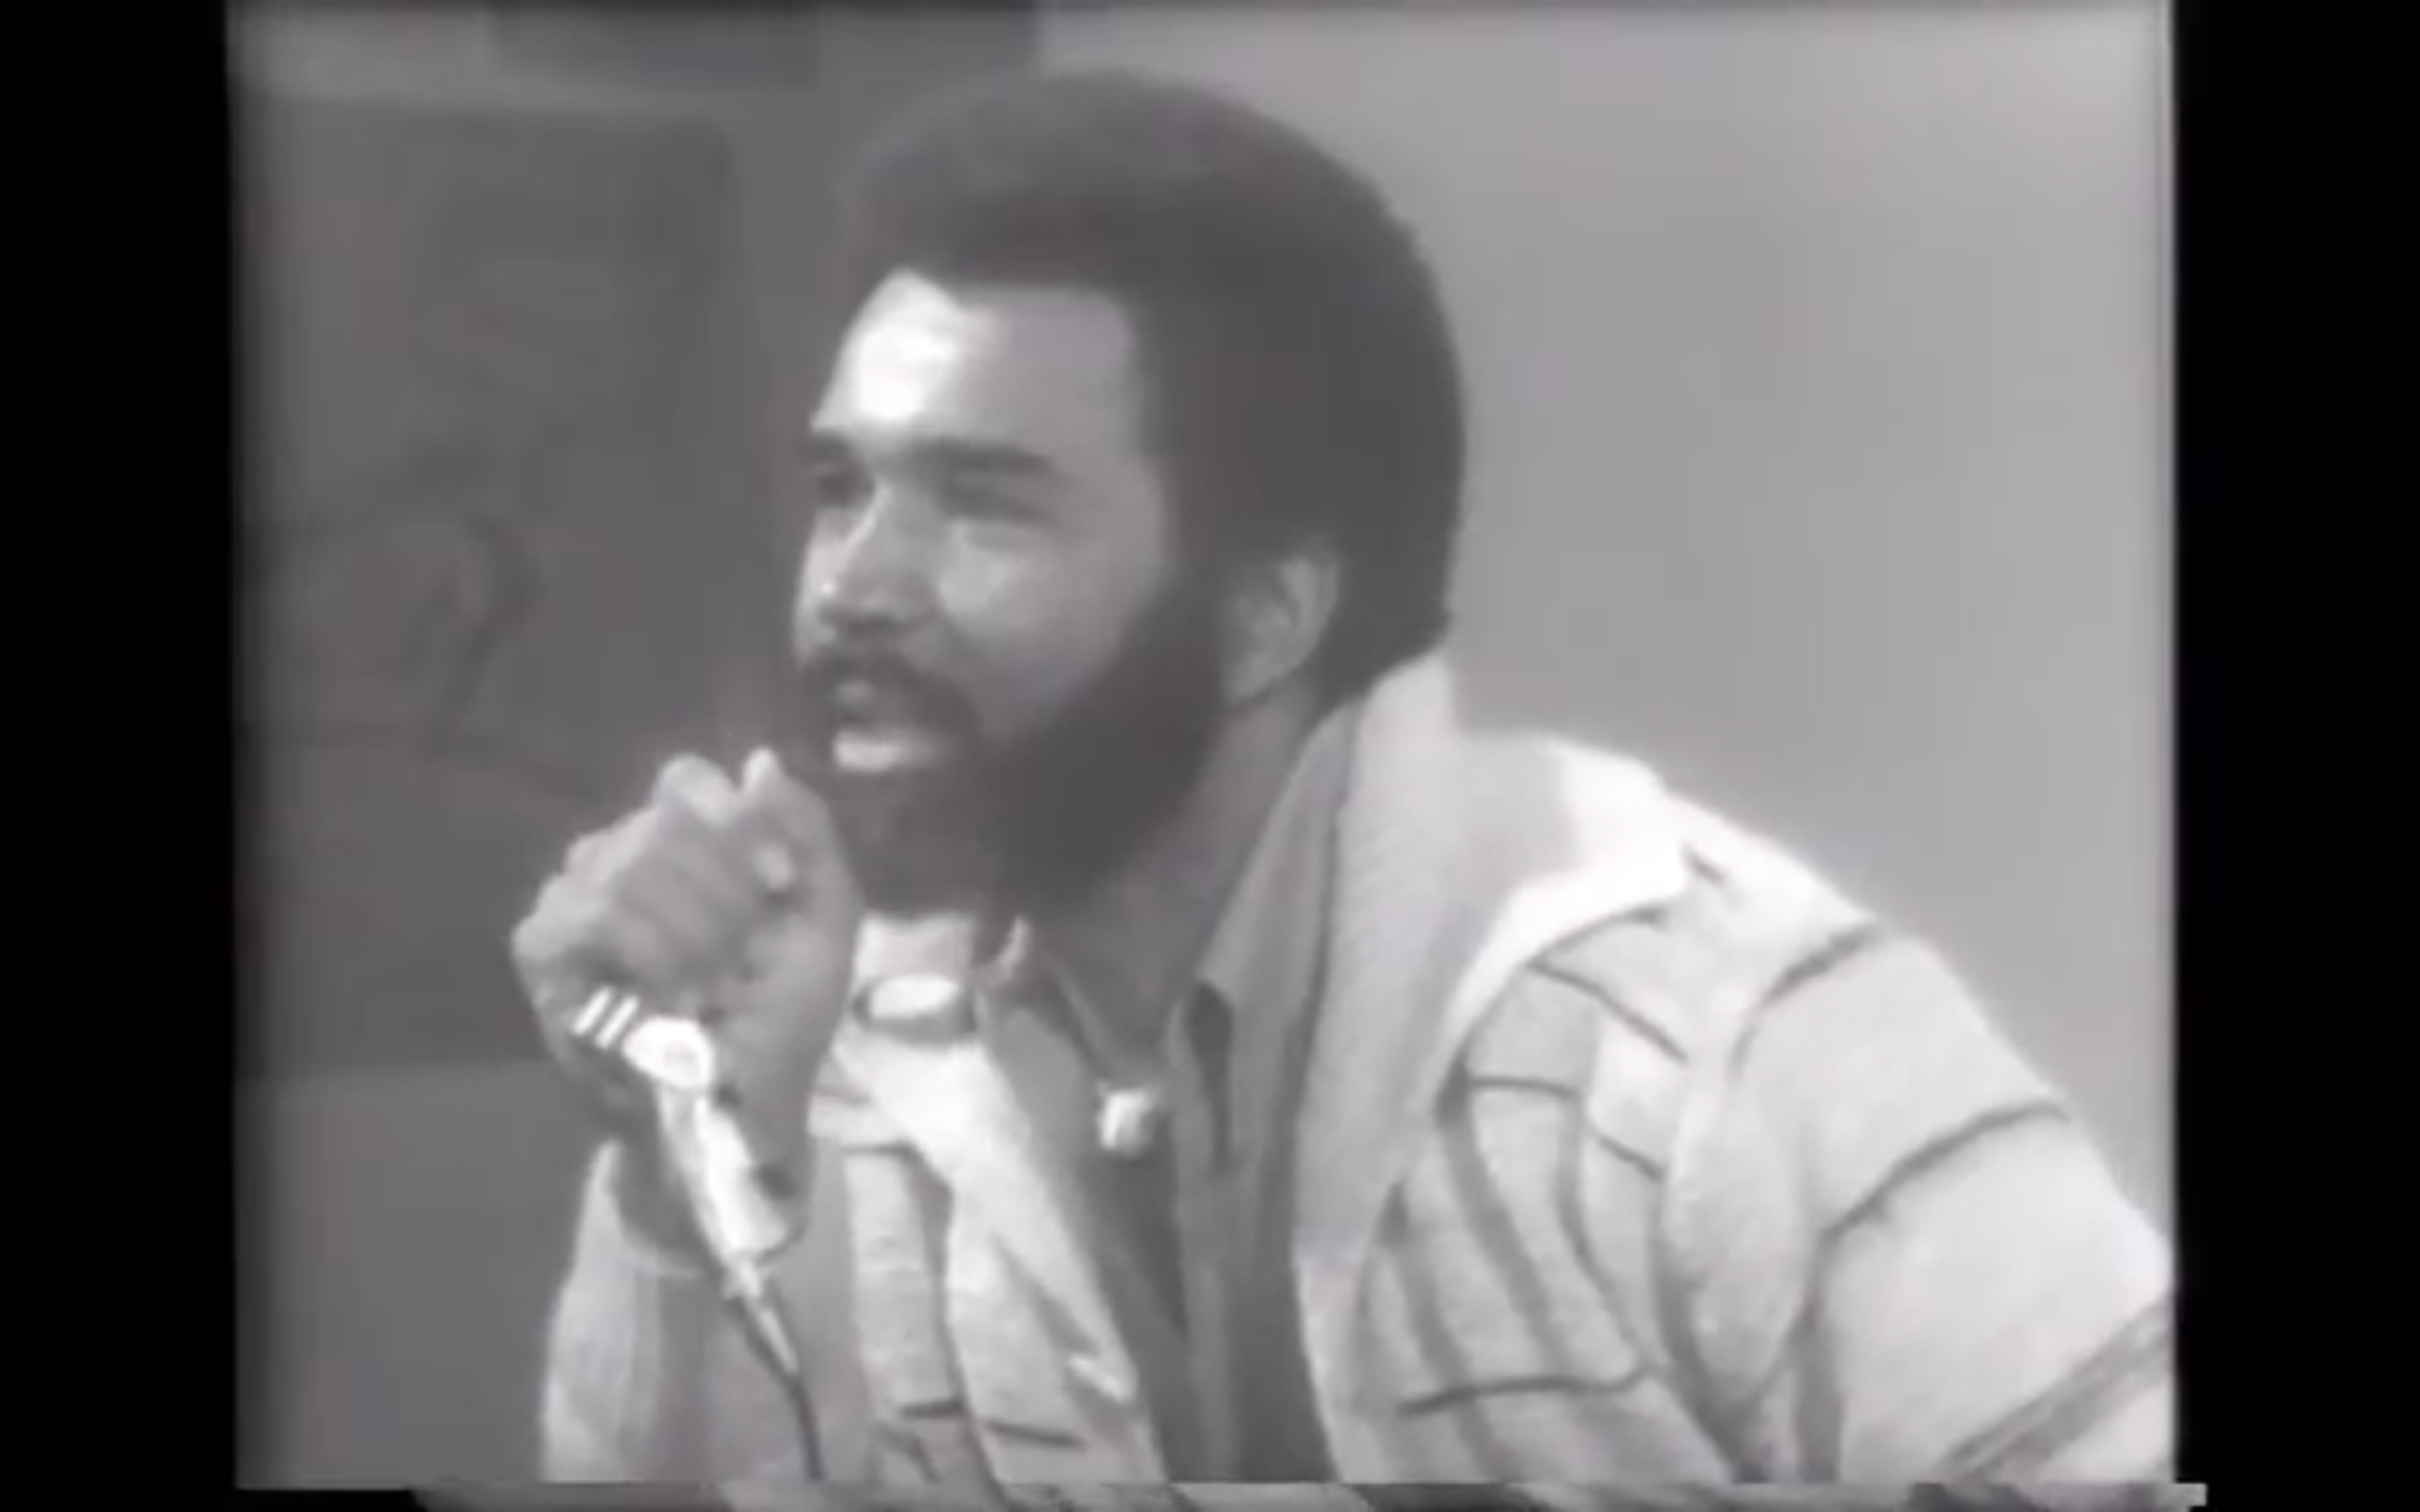 black and white image of man in the 1970s speaking into microphone